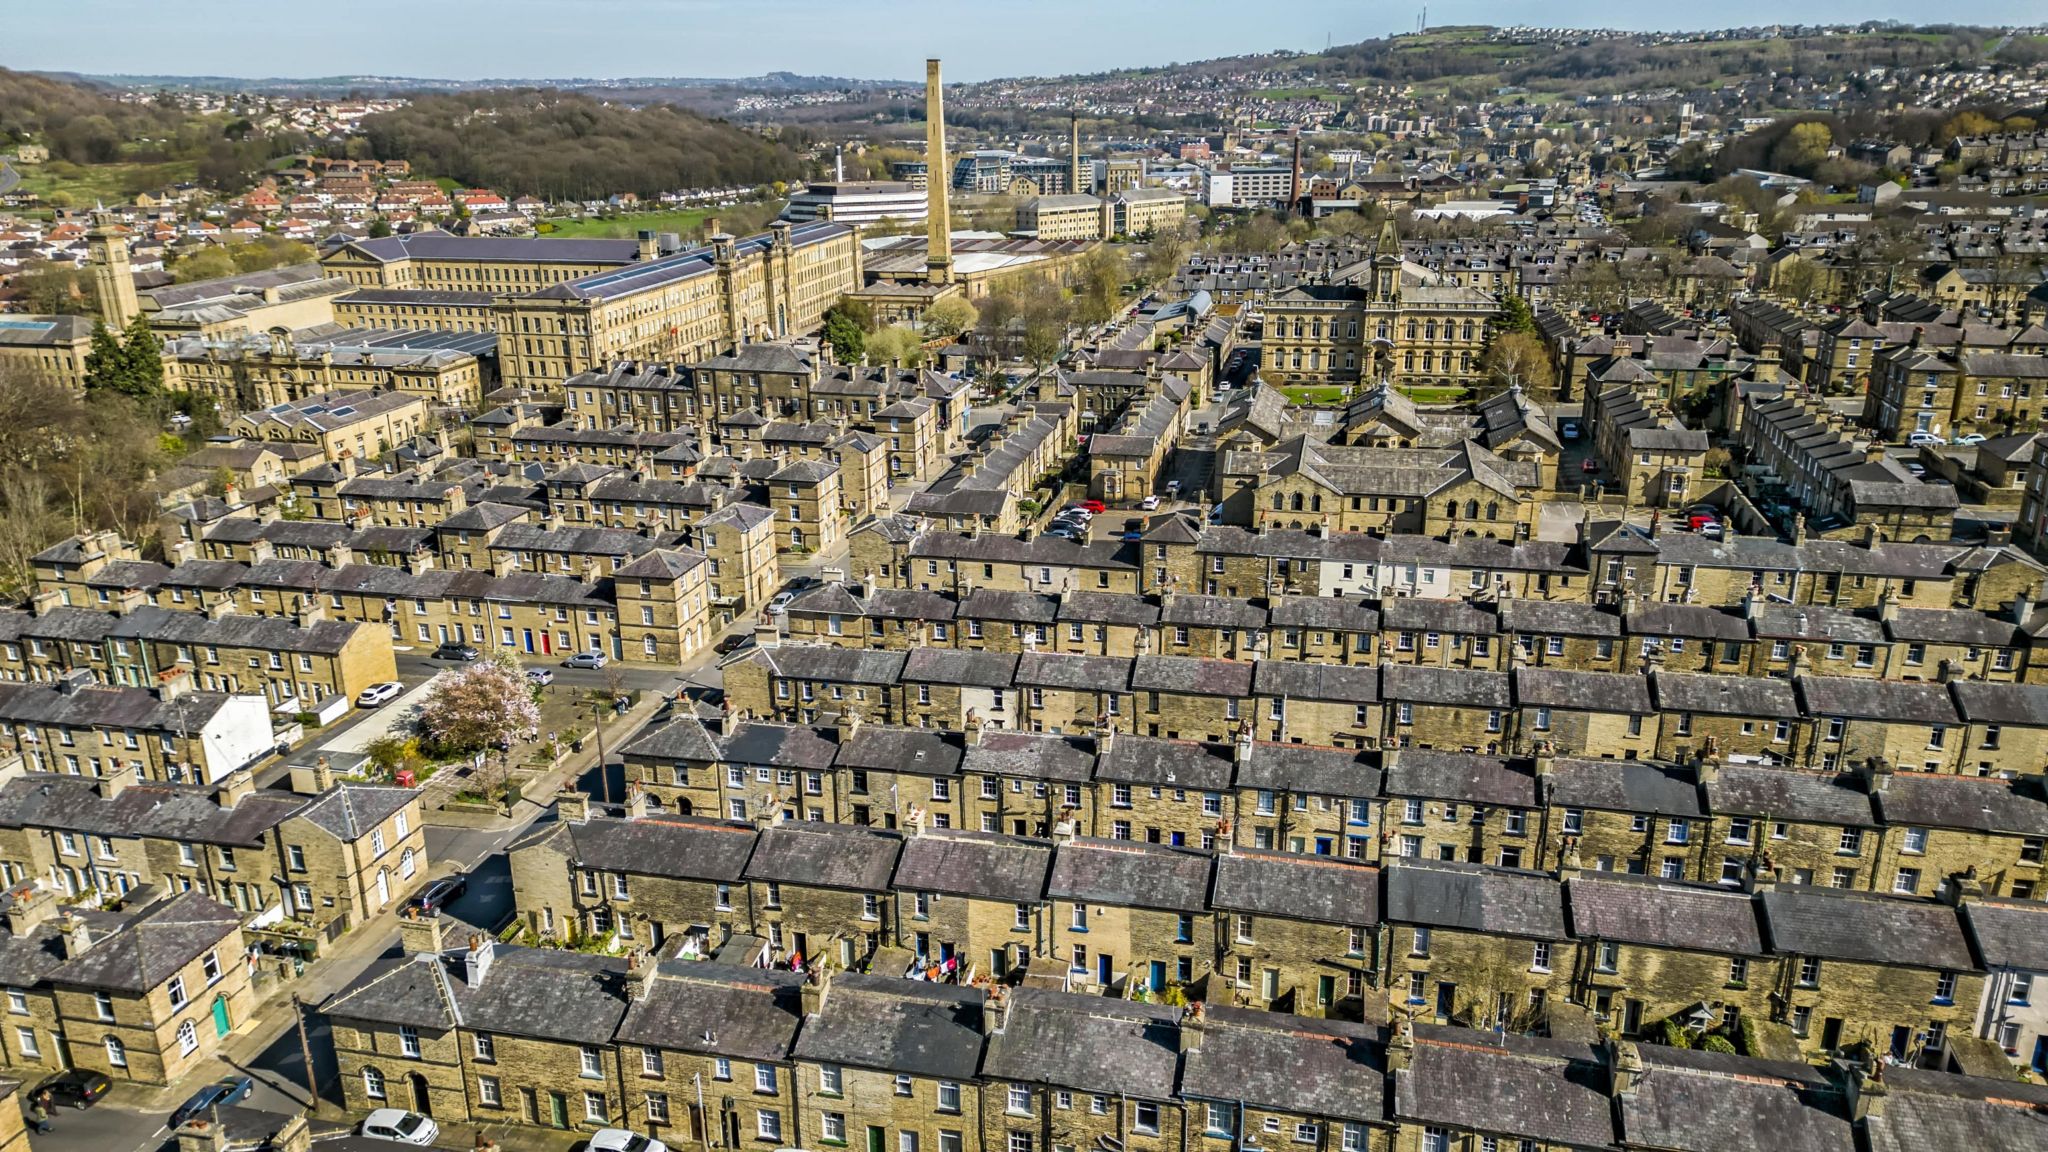 Overhead view of Saltaire